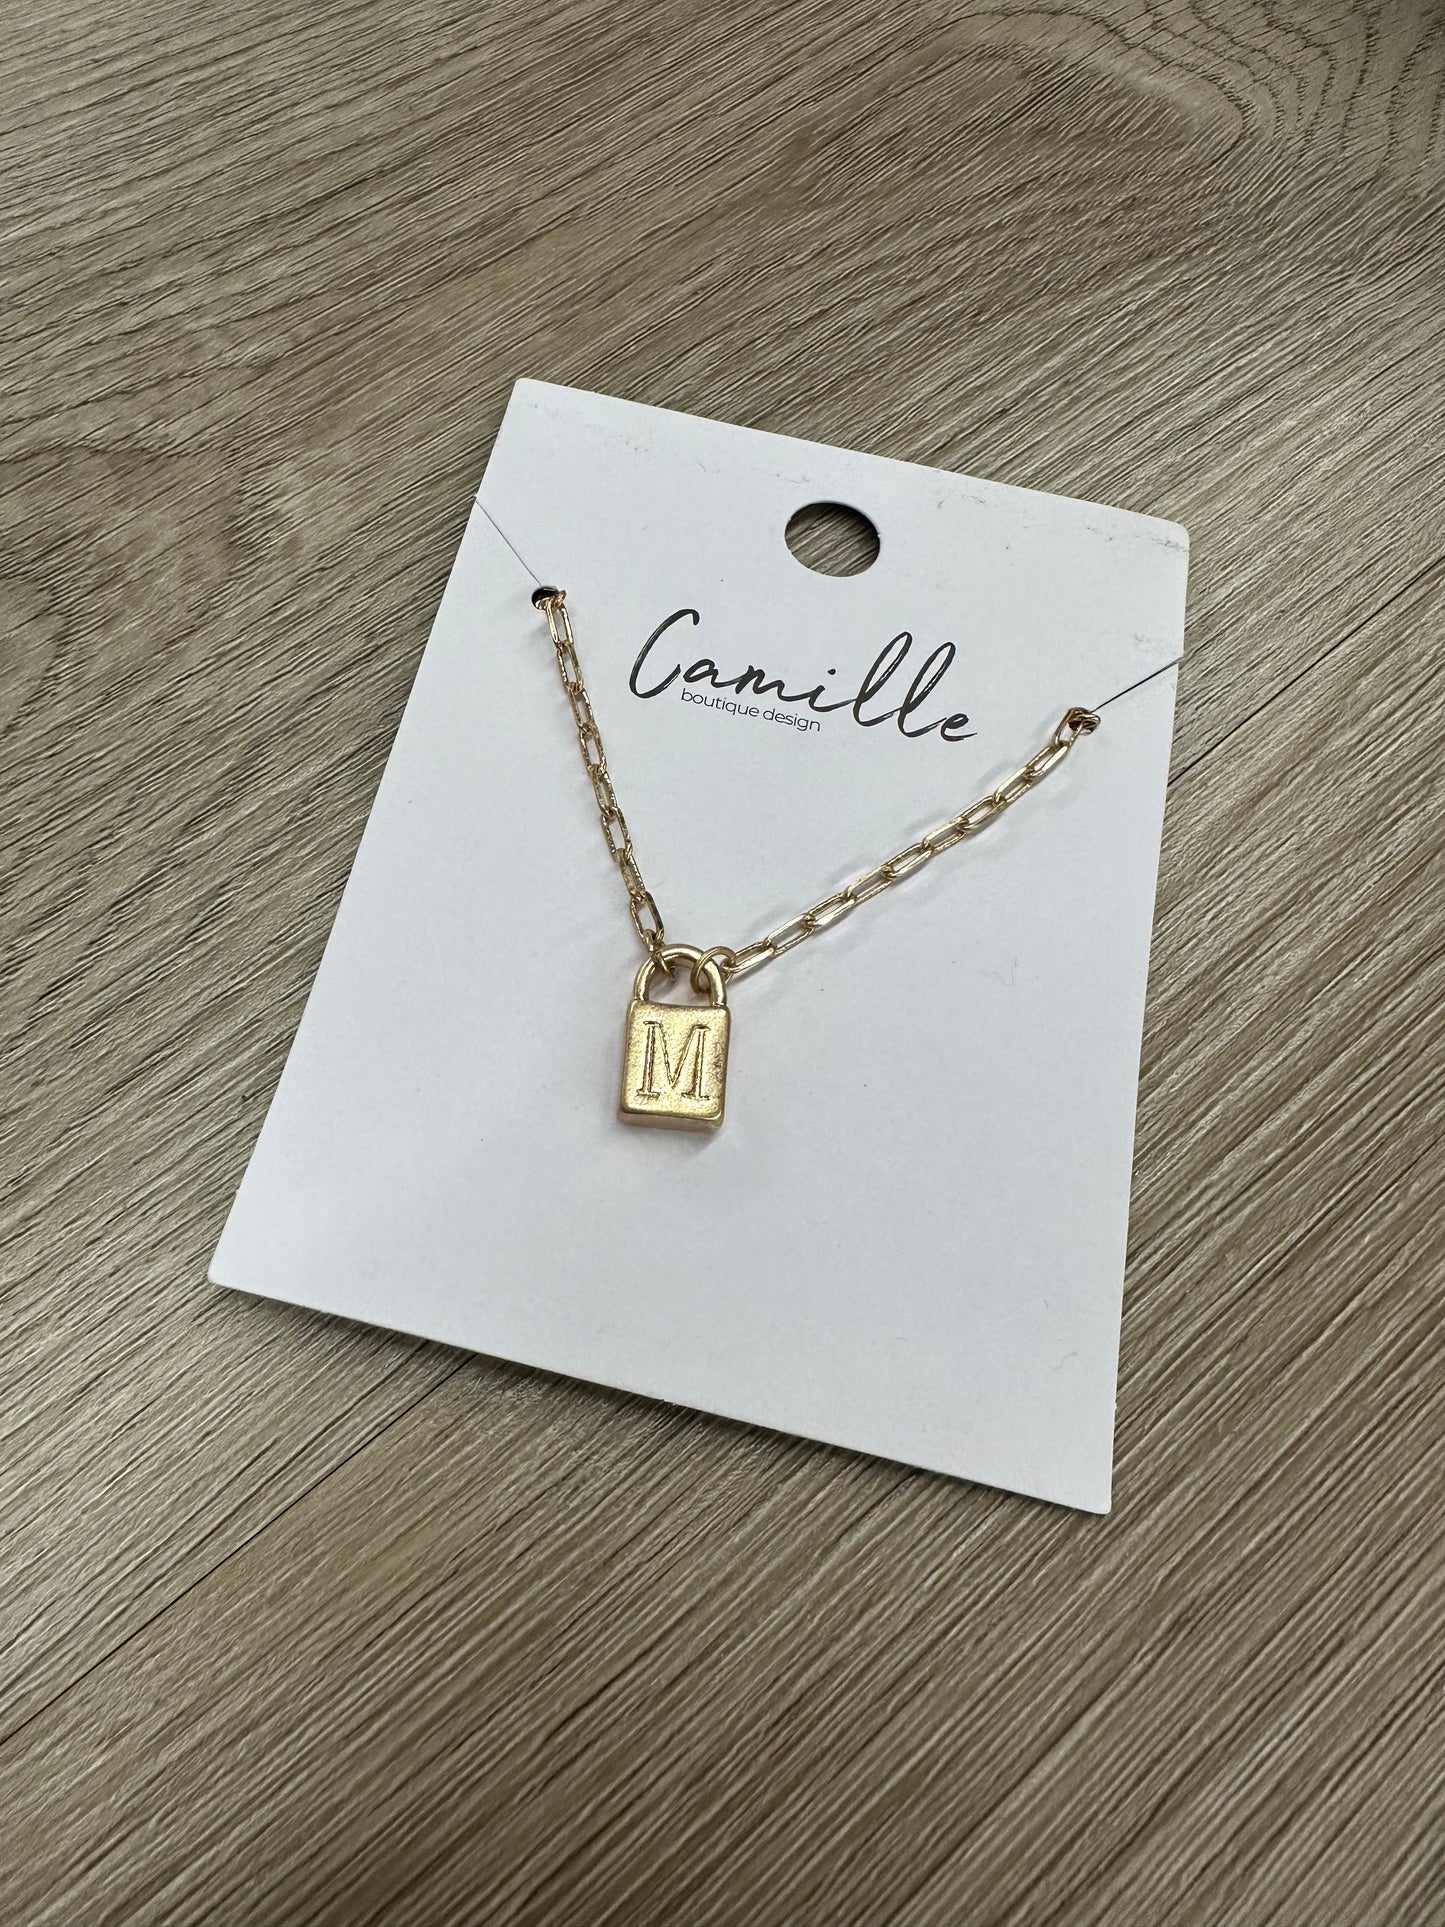 The Lock Initial Necklace - ASST.